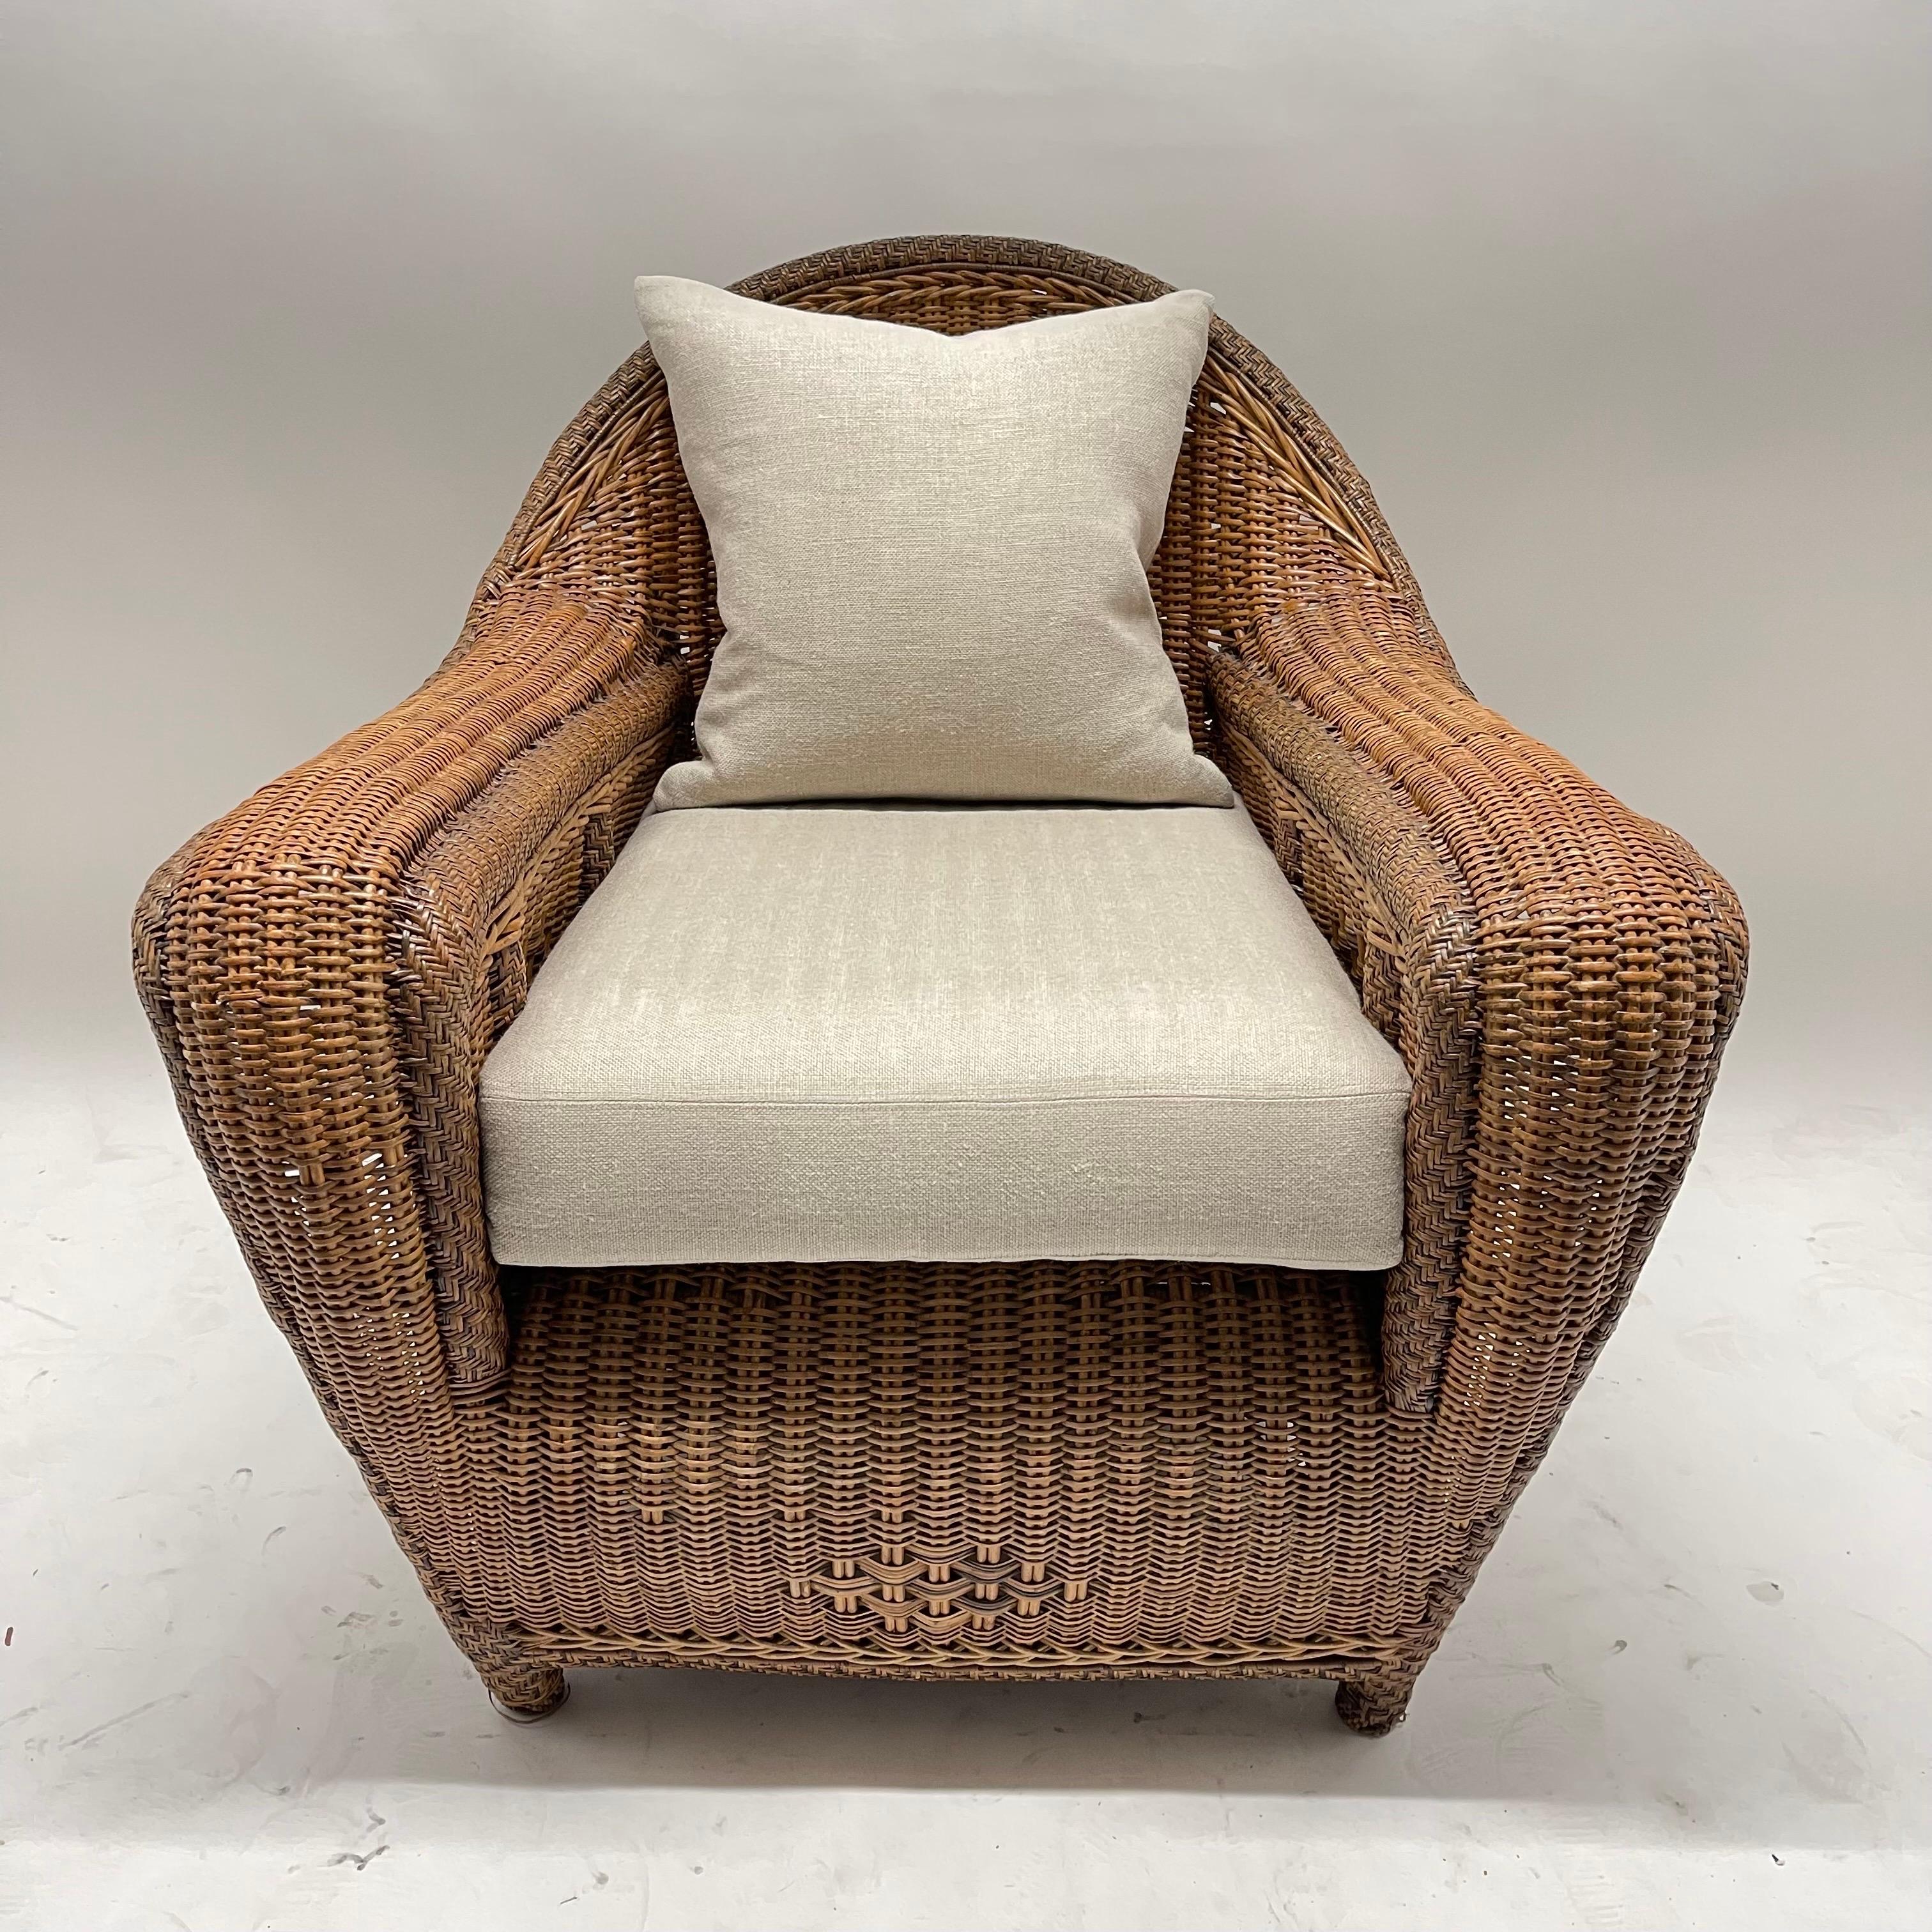 American Rare Pair of Art Deco Wicker and Rattan Club Chairs or Armchairs, circa 1930s